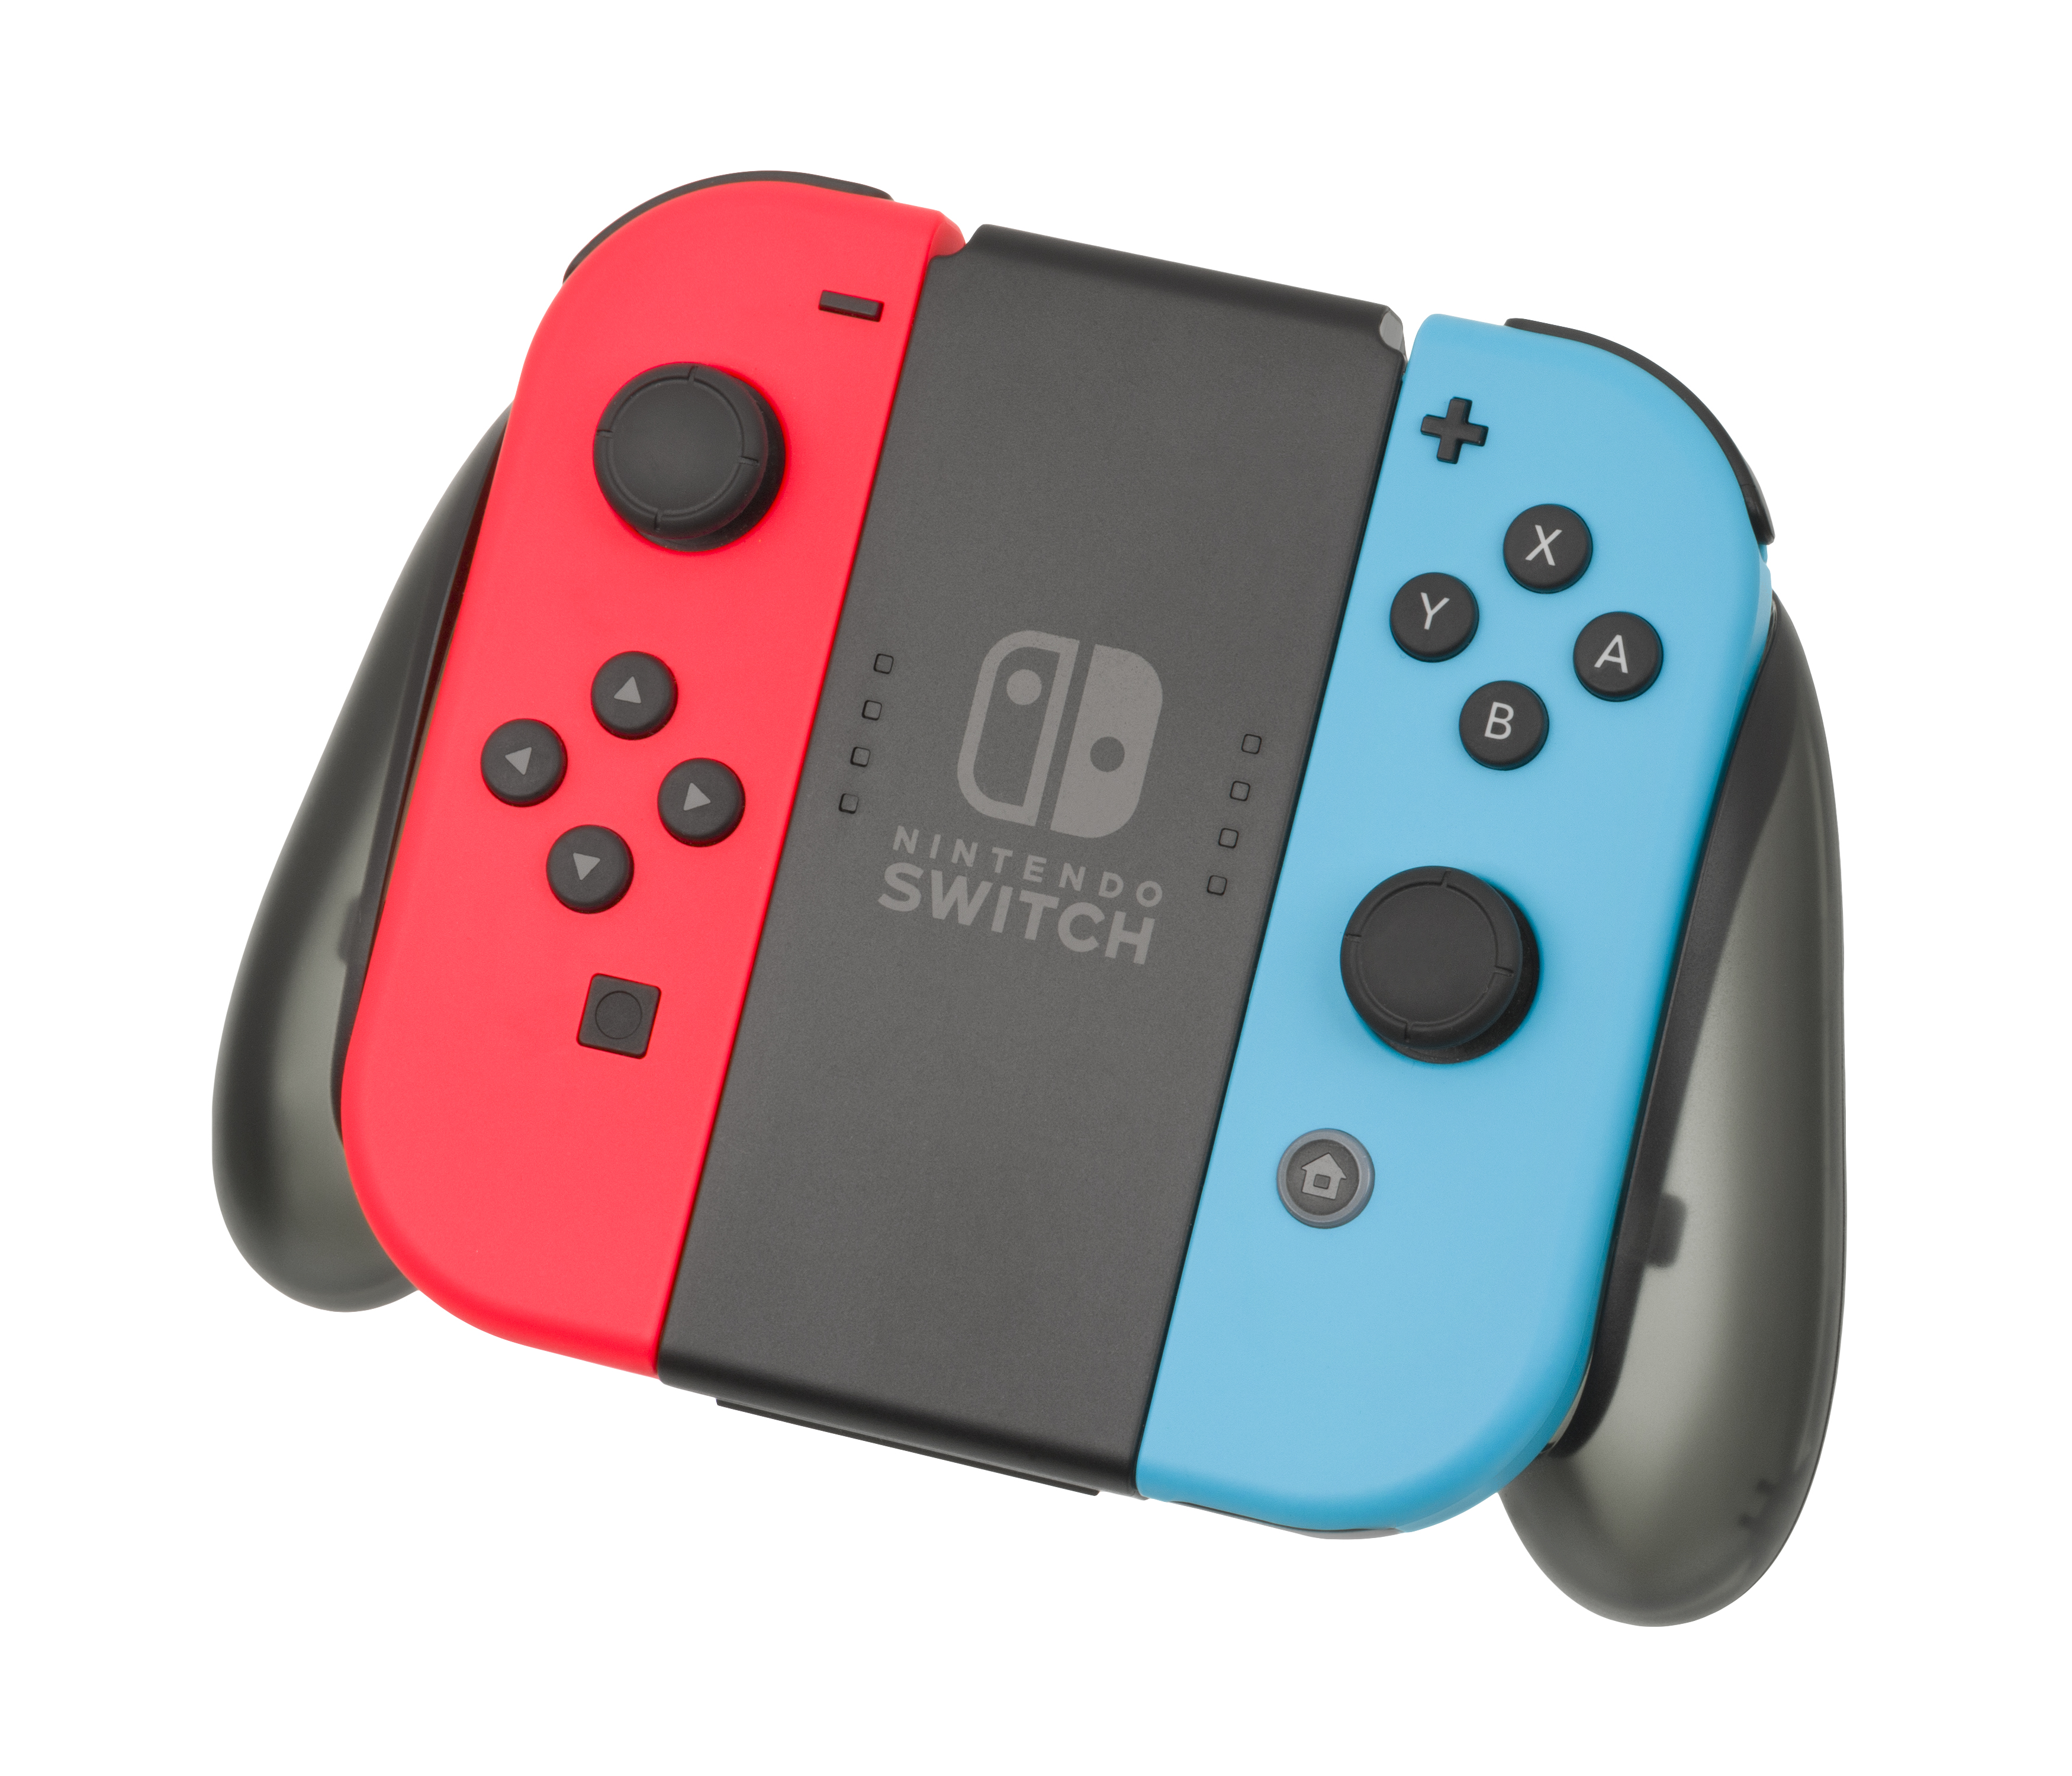 If available, try using a different Joy-Con to see if the issue persists.
If the other Joy-Con works fine, the original one may need to be repaired or replaced.